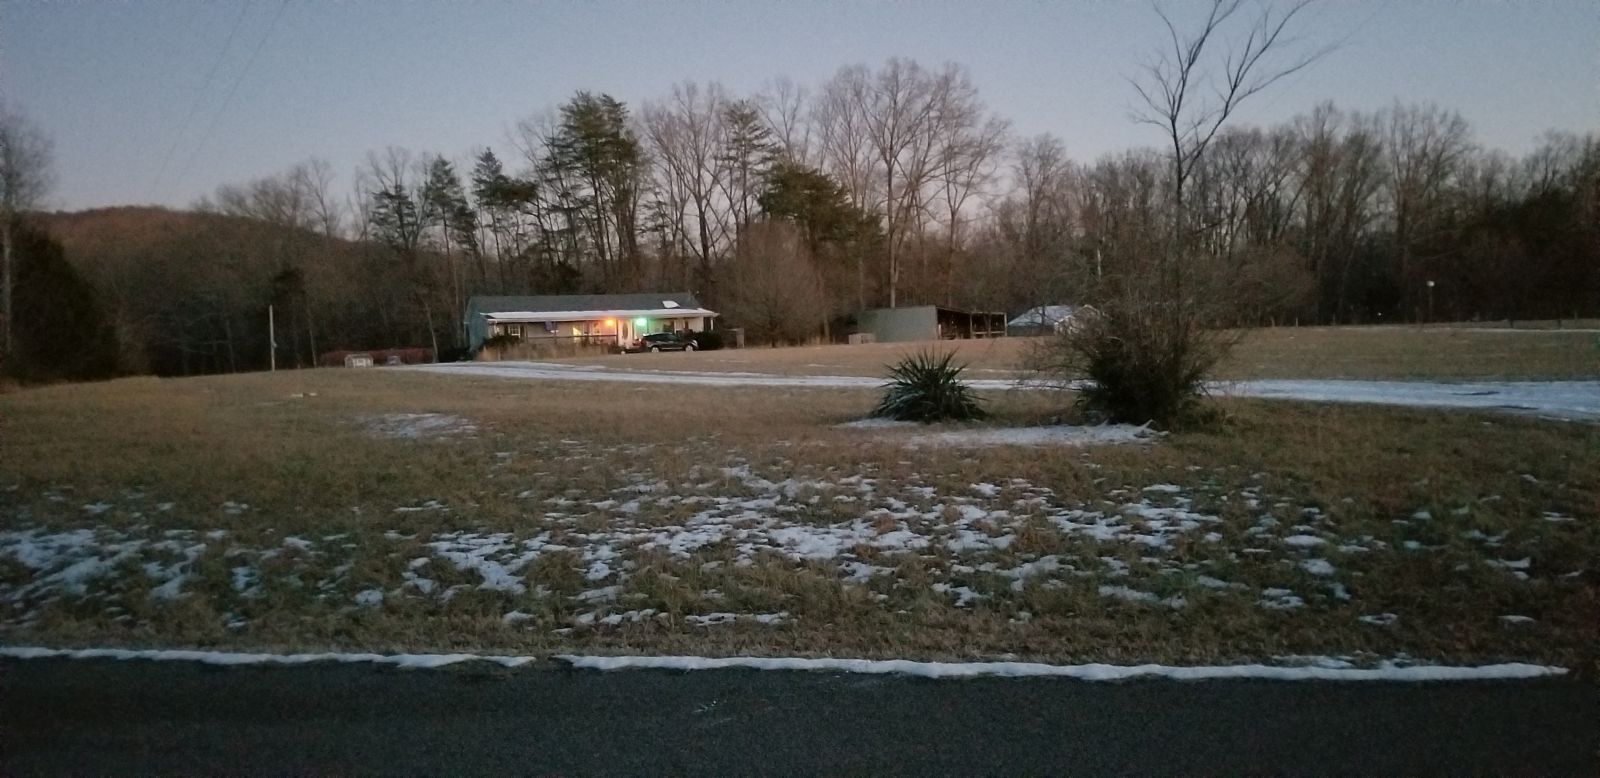 20180118_172507 front of house from road at dusk.jpg